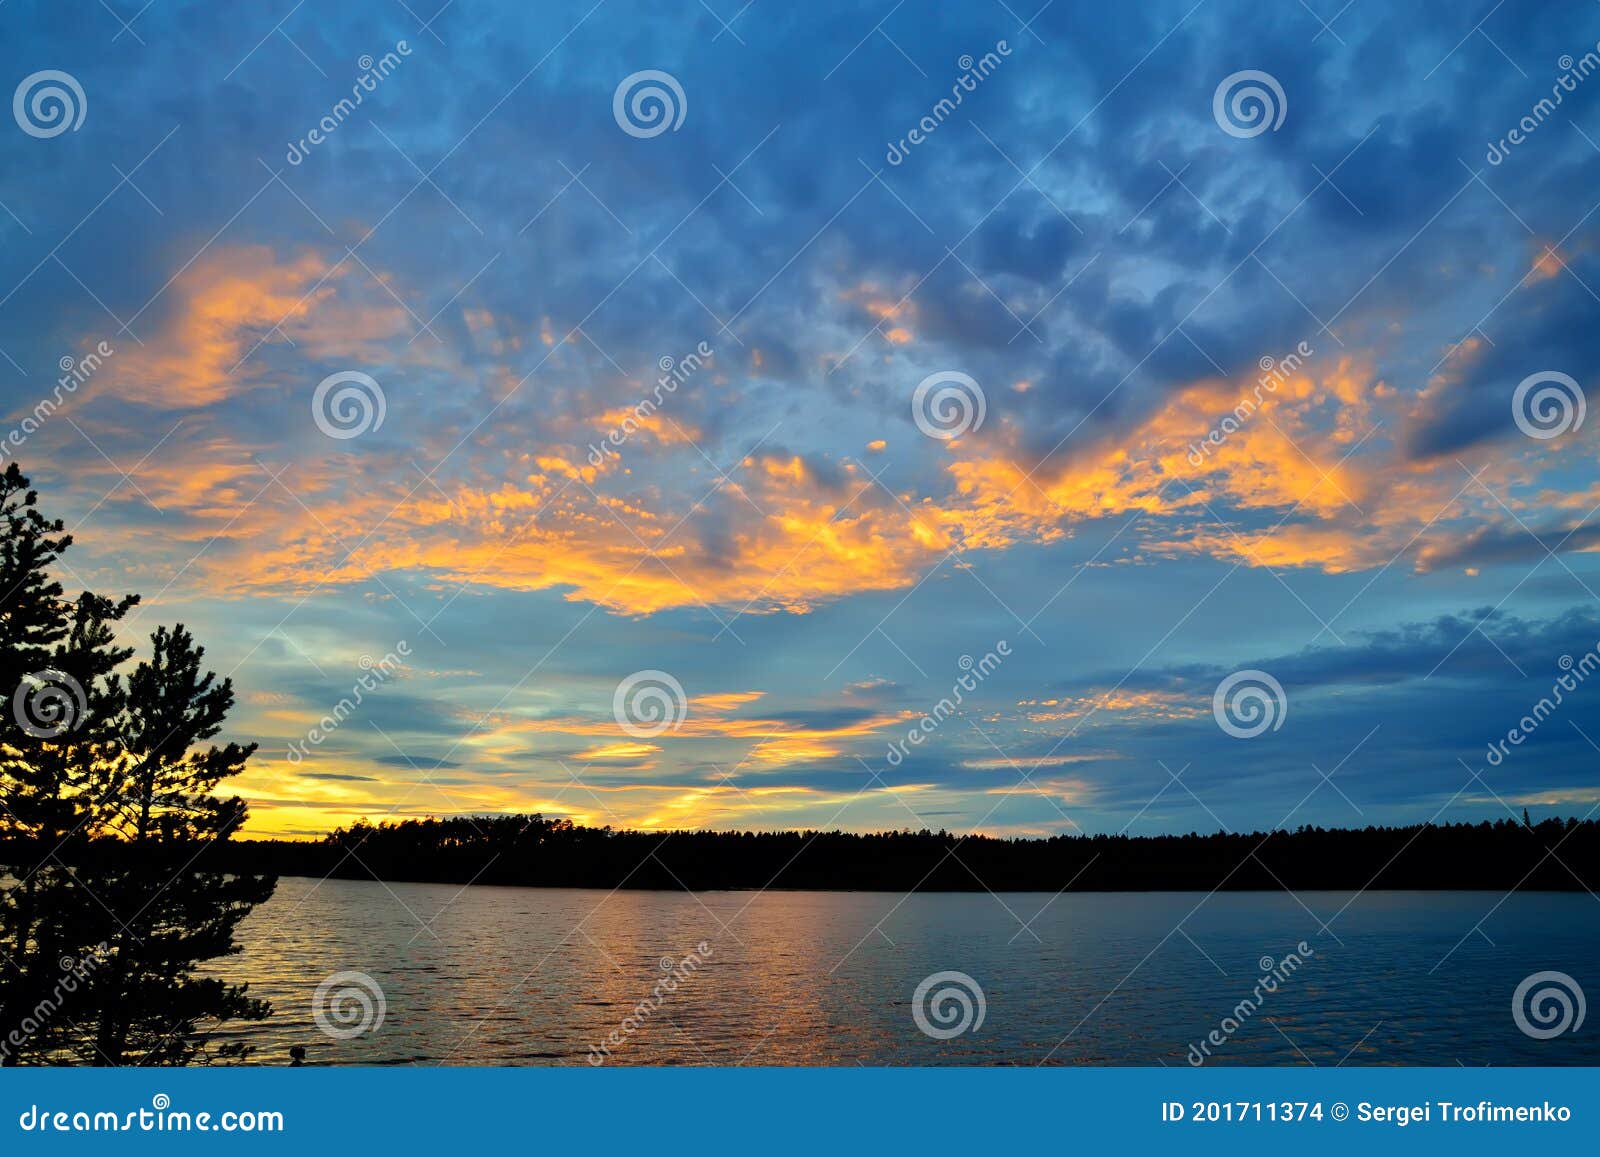 picturesque northern sunset. keret lake, north karelia, russia